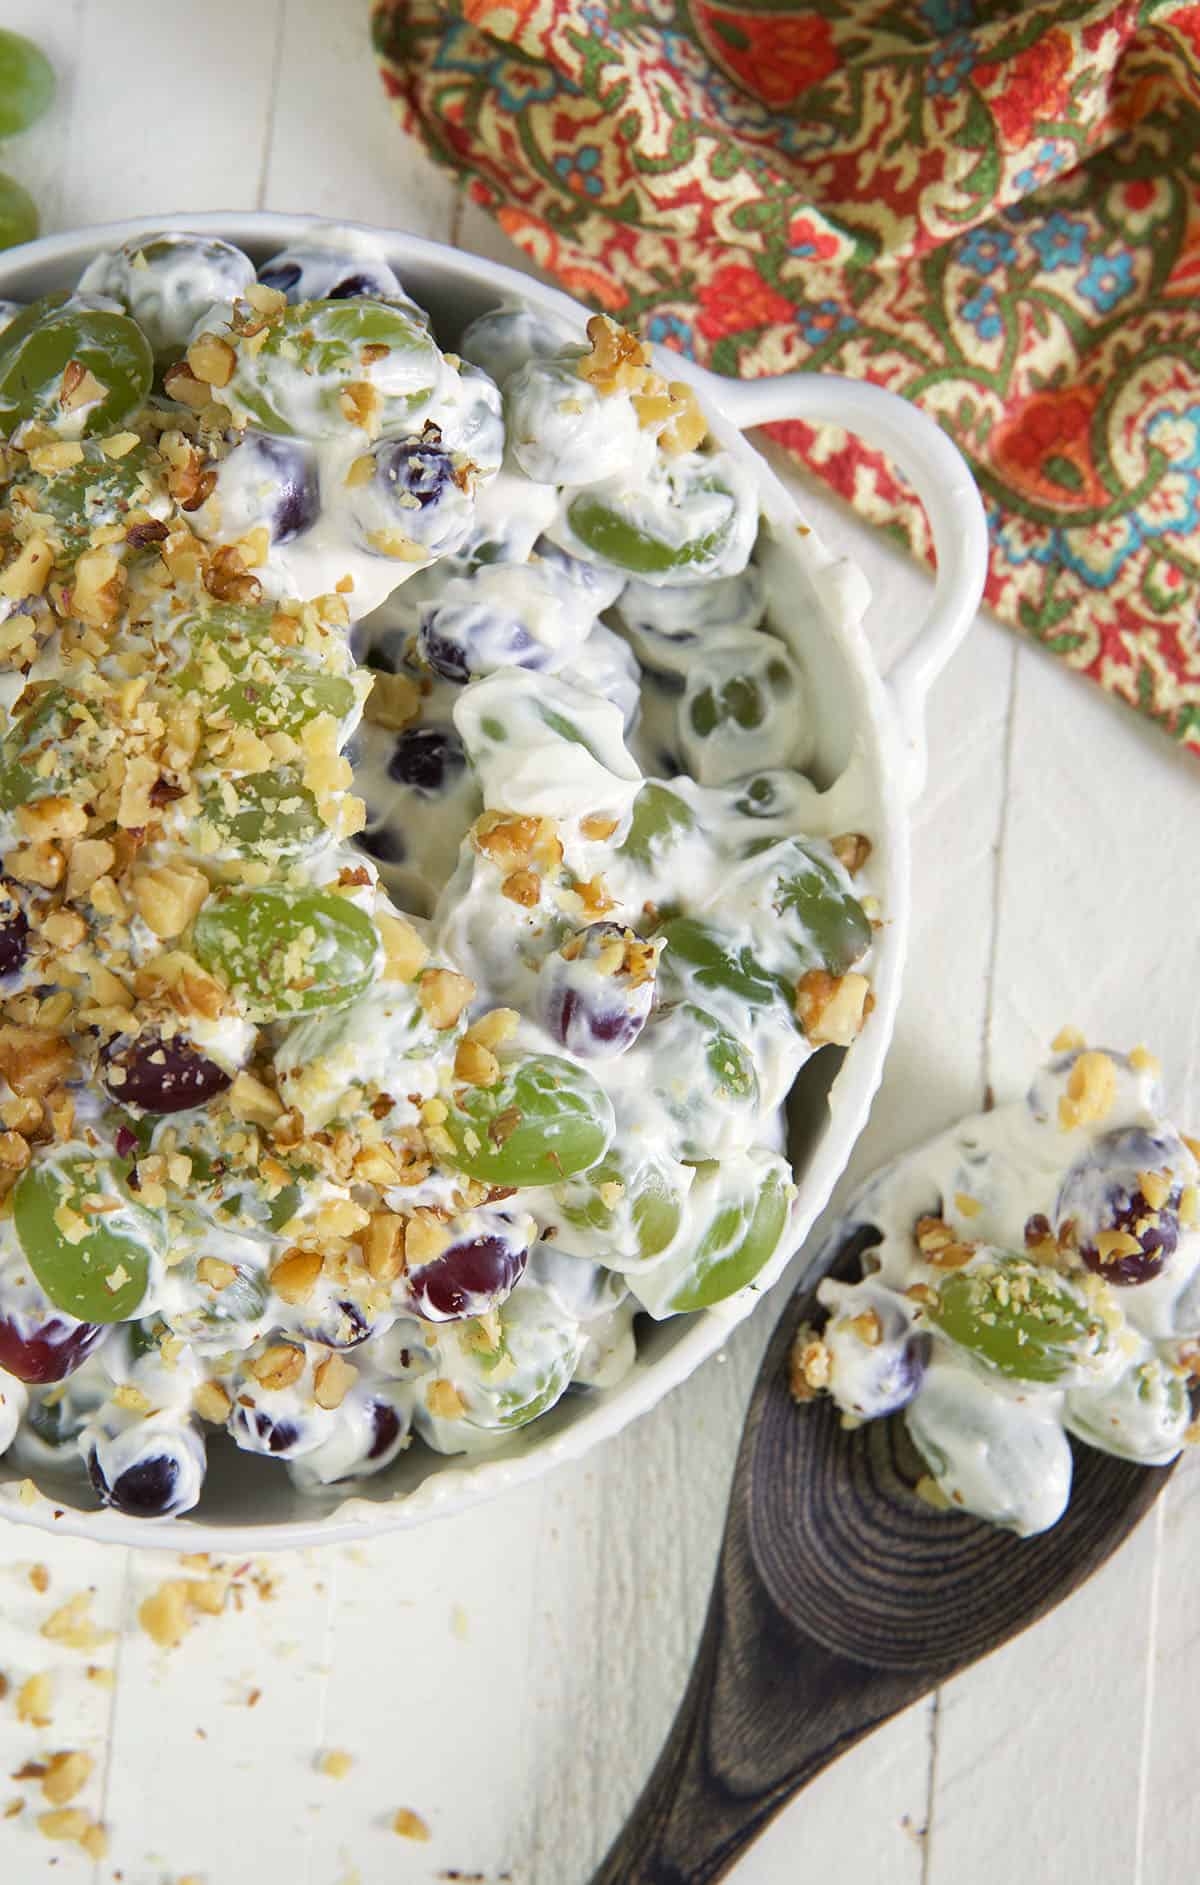 A wooden spoon has scooped out a serving of grape salad from the bowl.